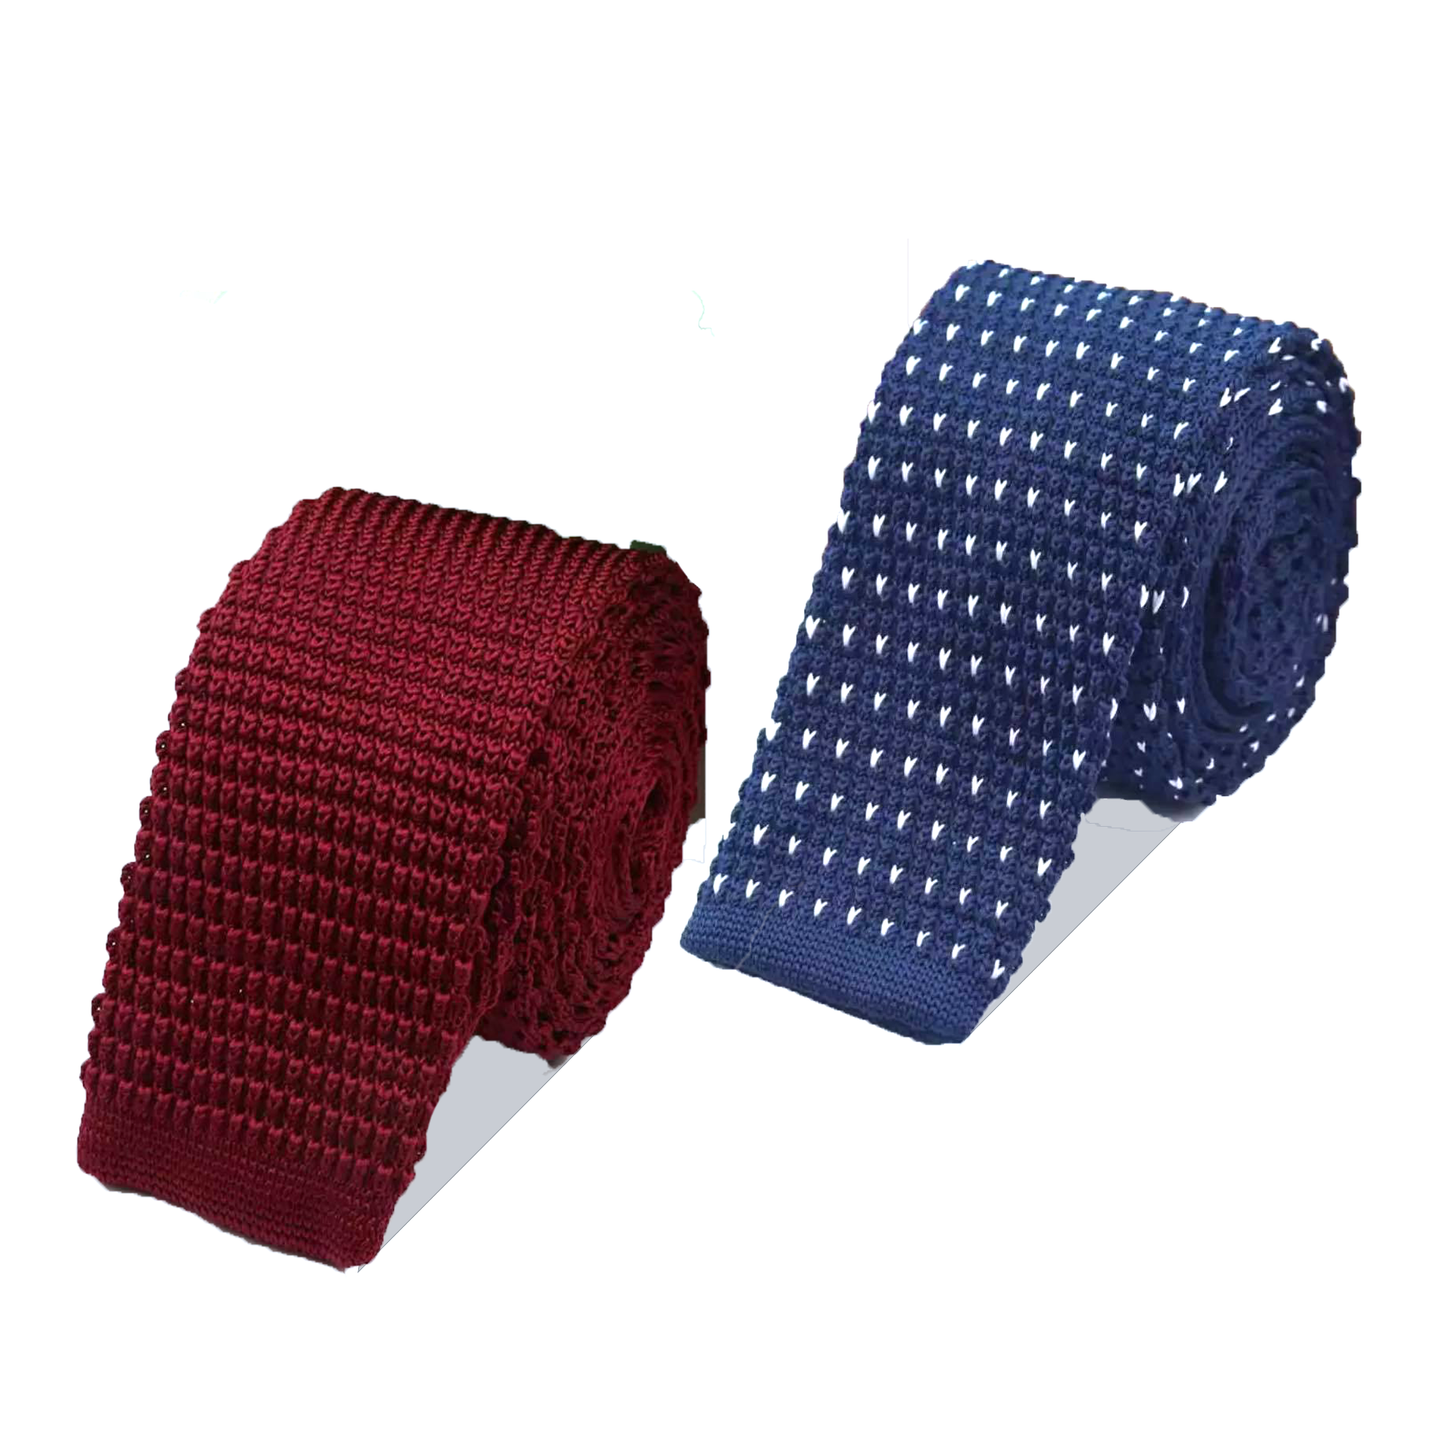 The Monthly Tie Club | Two Knitted Tie Subscription | Luxury tie subscriptions